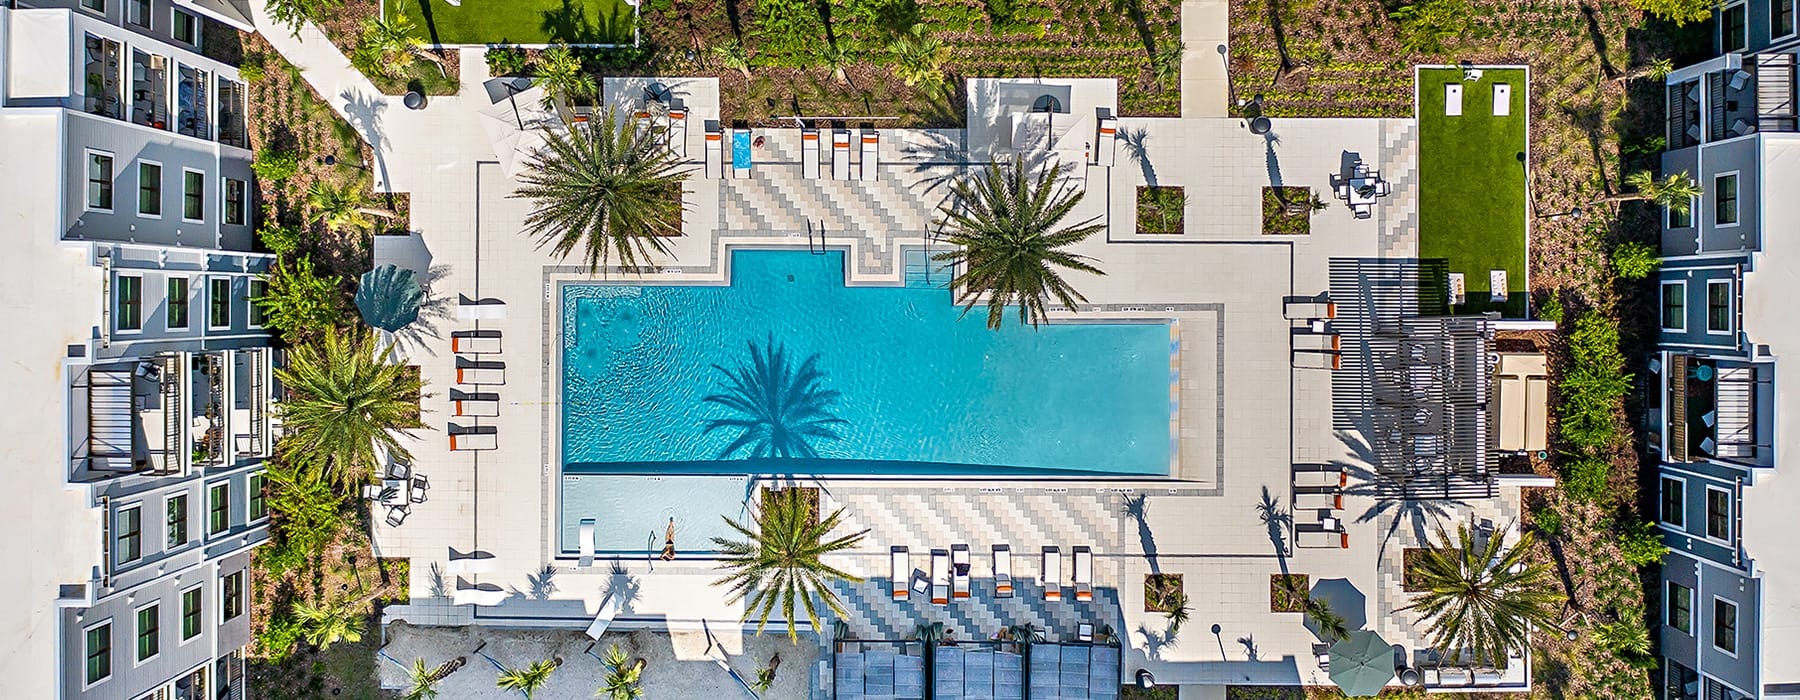 aerial view of a pool and inner courtyard